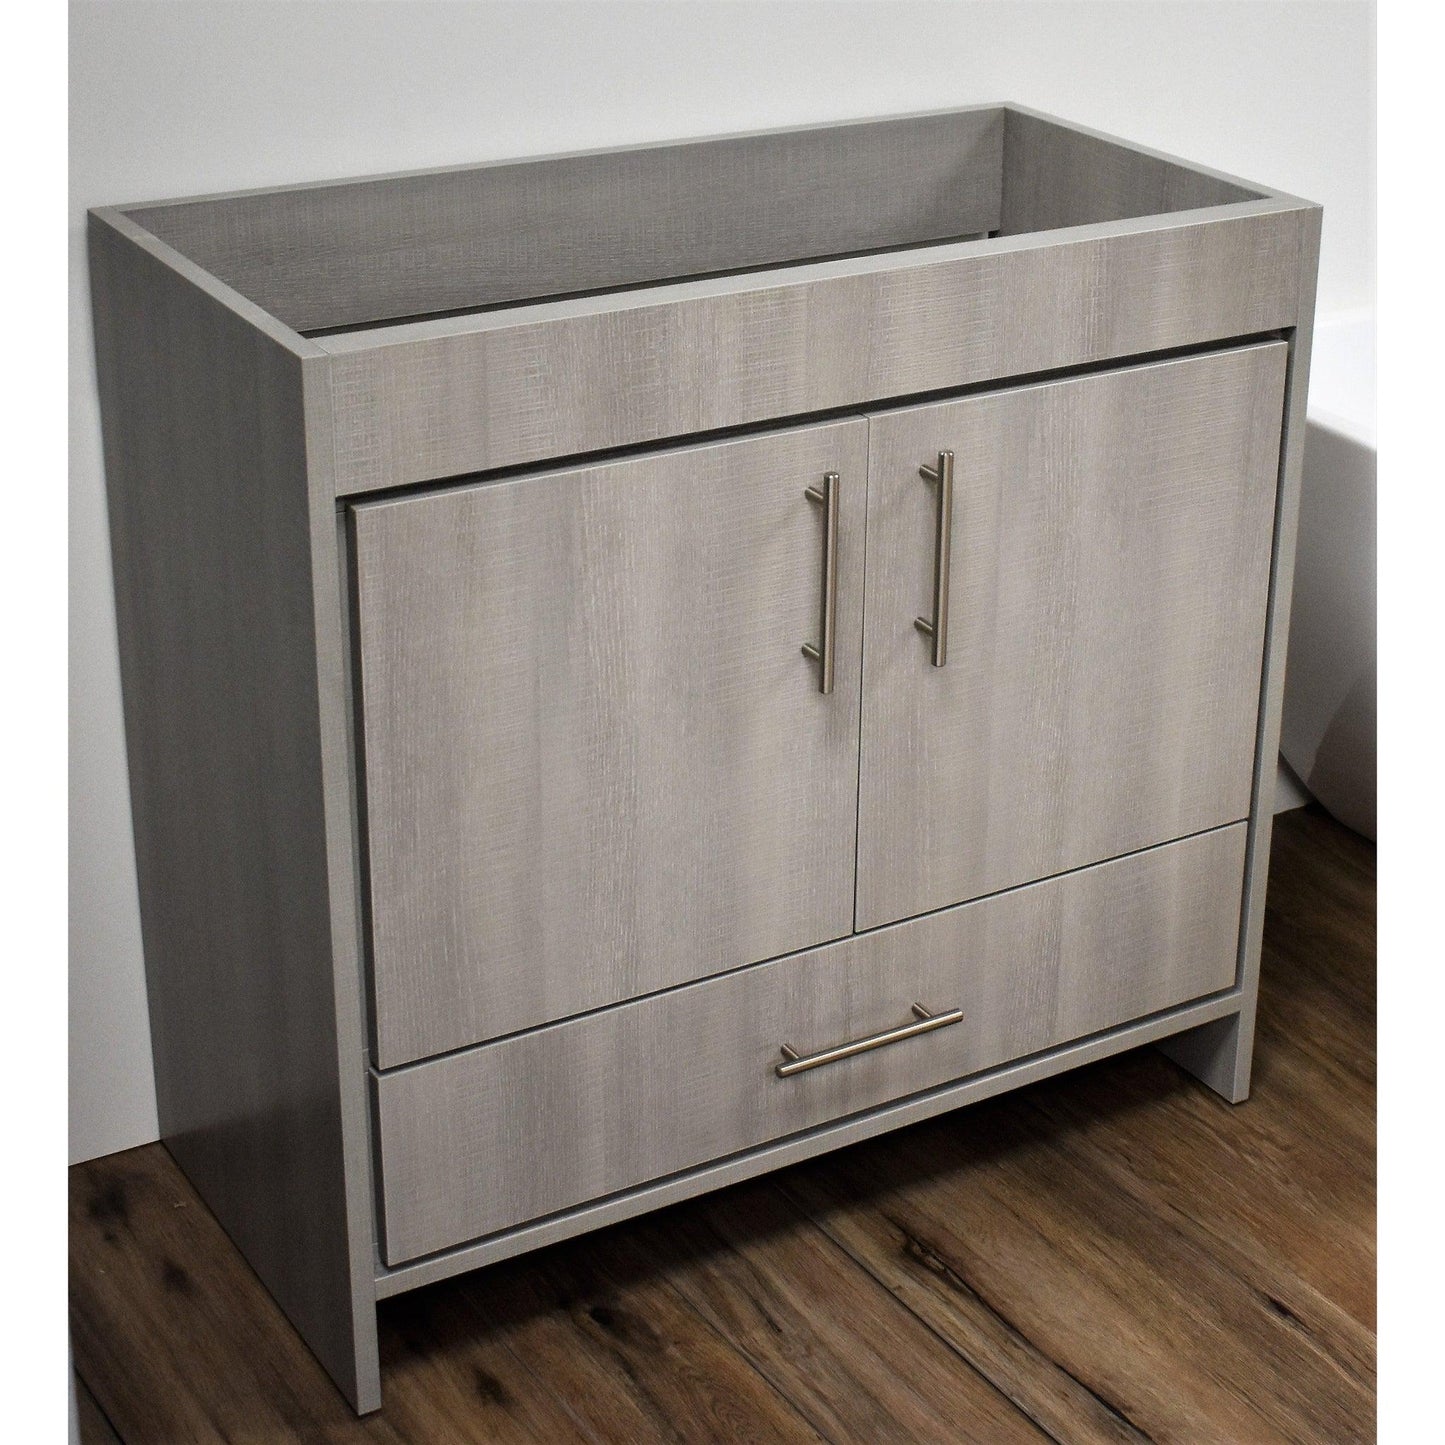 Volpa USA Pacific 36" Weathered Gray Freestanding Modern Bathroom Vanity With Brushed Nickel Round Handles Cabinet Only